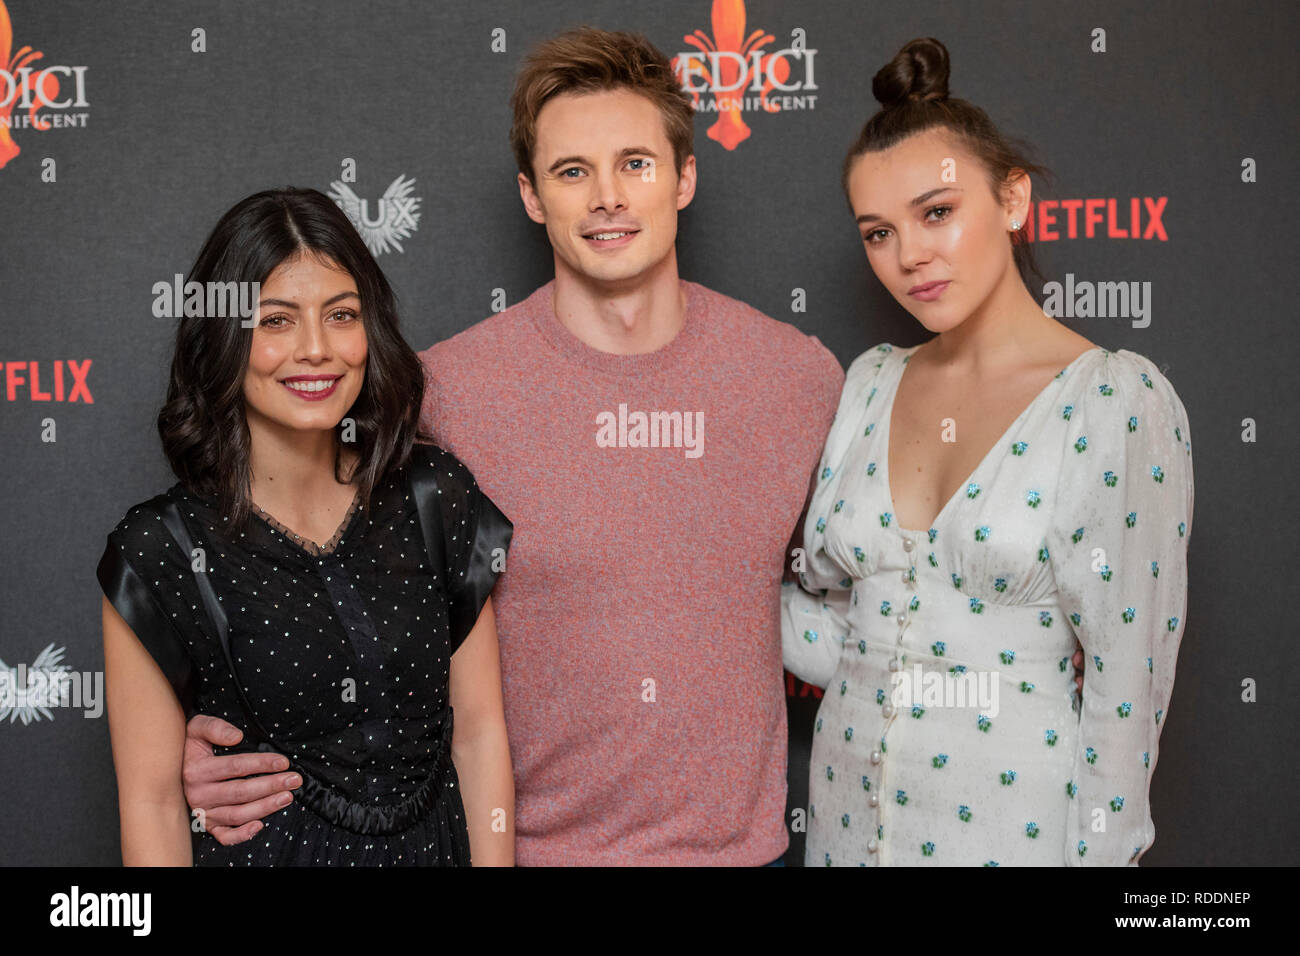 Soho, London, UK. 18th Jan 2019. Alessandra Mastronardi, Bradley James and Synnøve Karlsen - Medici: The Magnificent screening, a new series on Netflix produced by Lux - in the Soho Hotel. Credit: Guy Bell/Alamy Live News Stock Photo